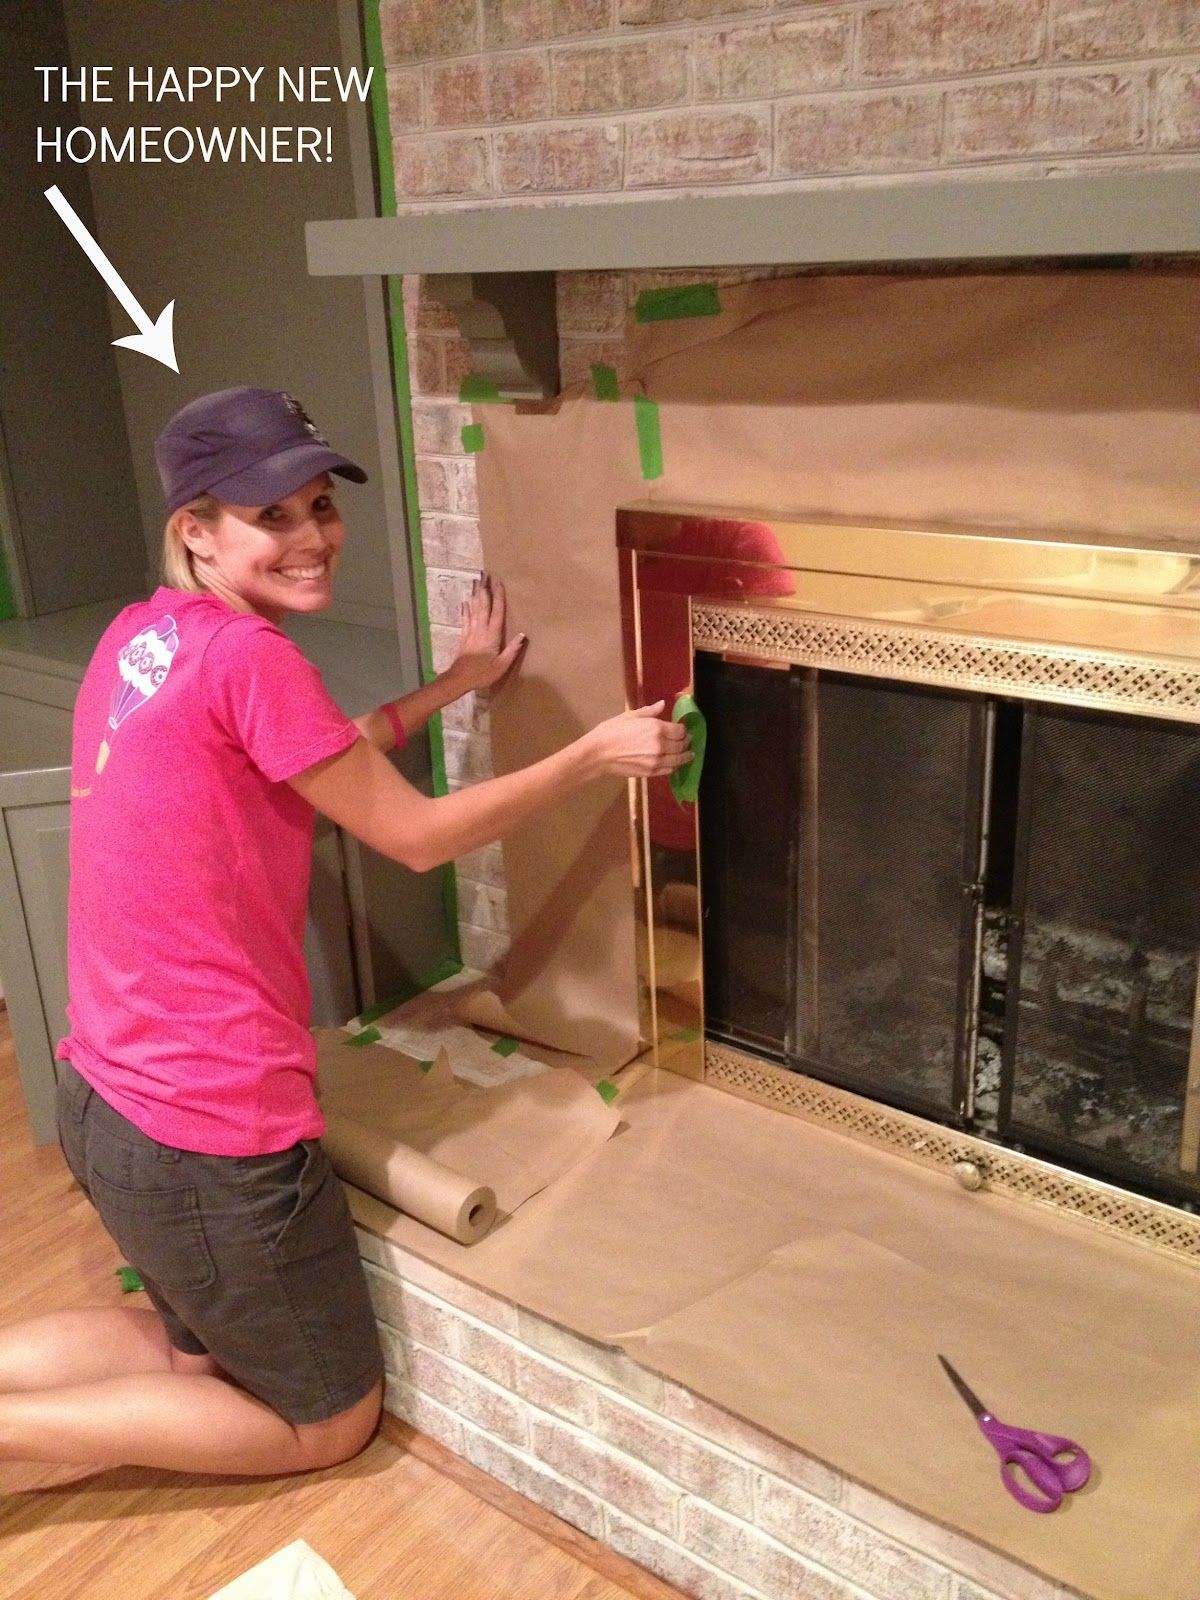 diy on how to white wash your brick hearth and paint the ugly brass fireplace!